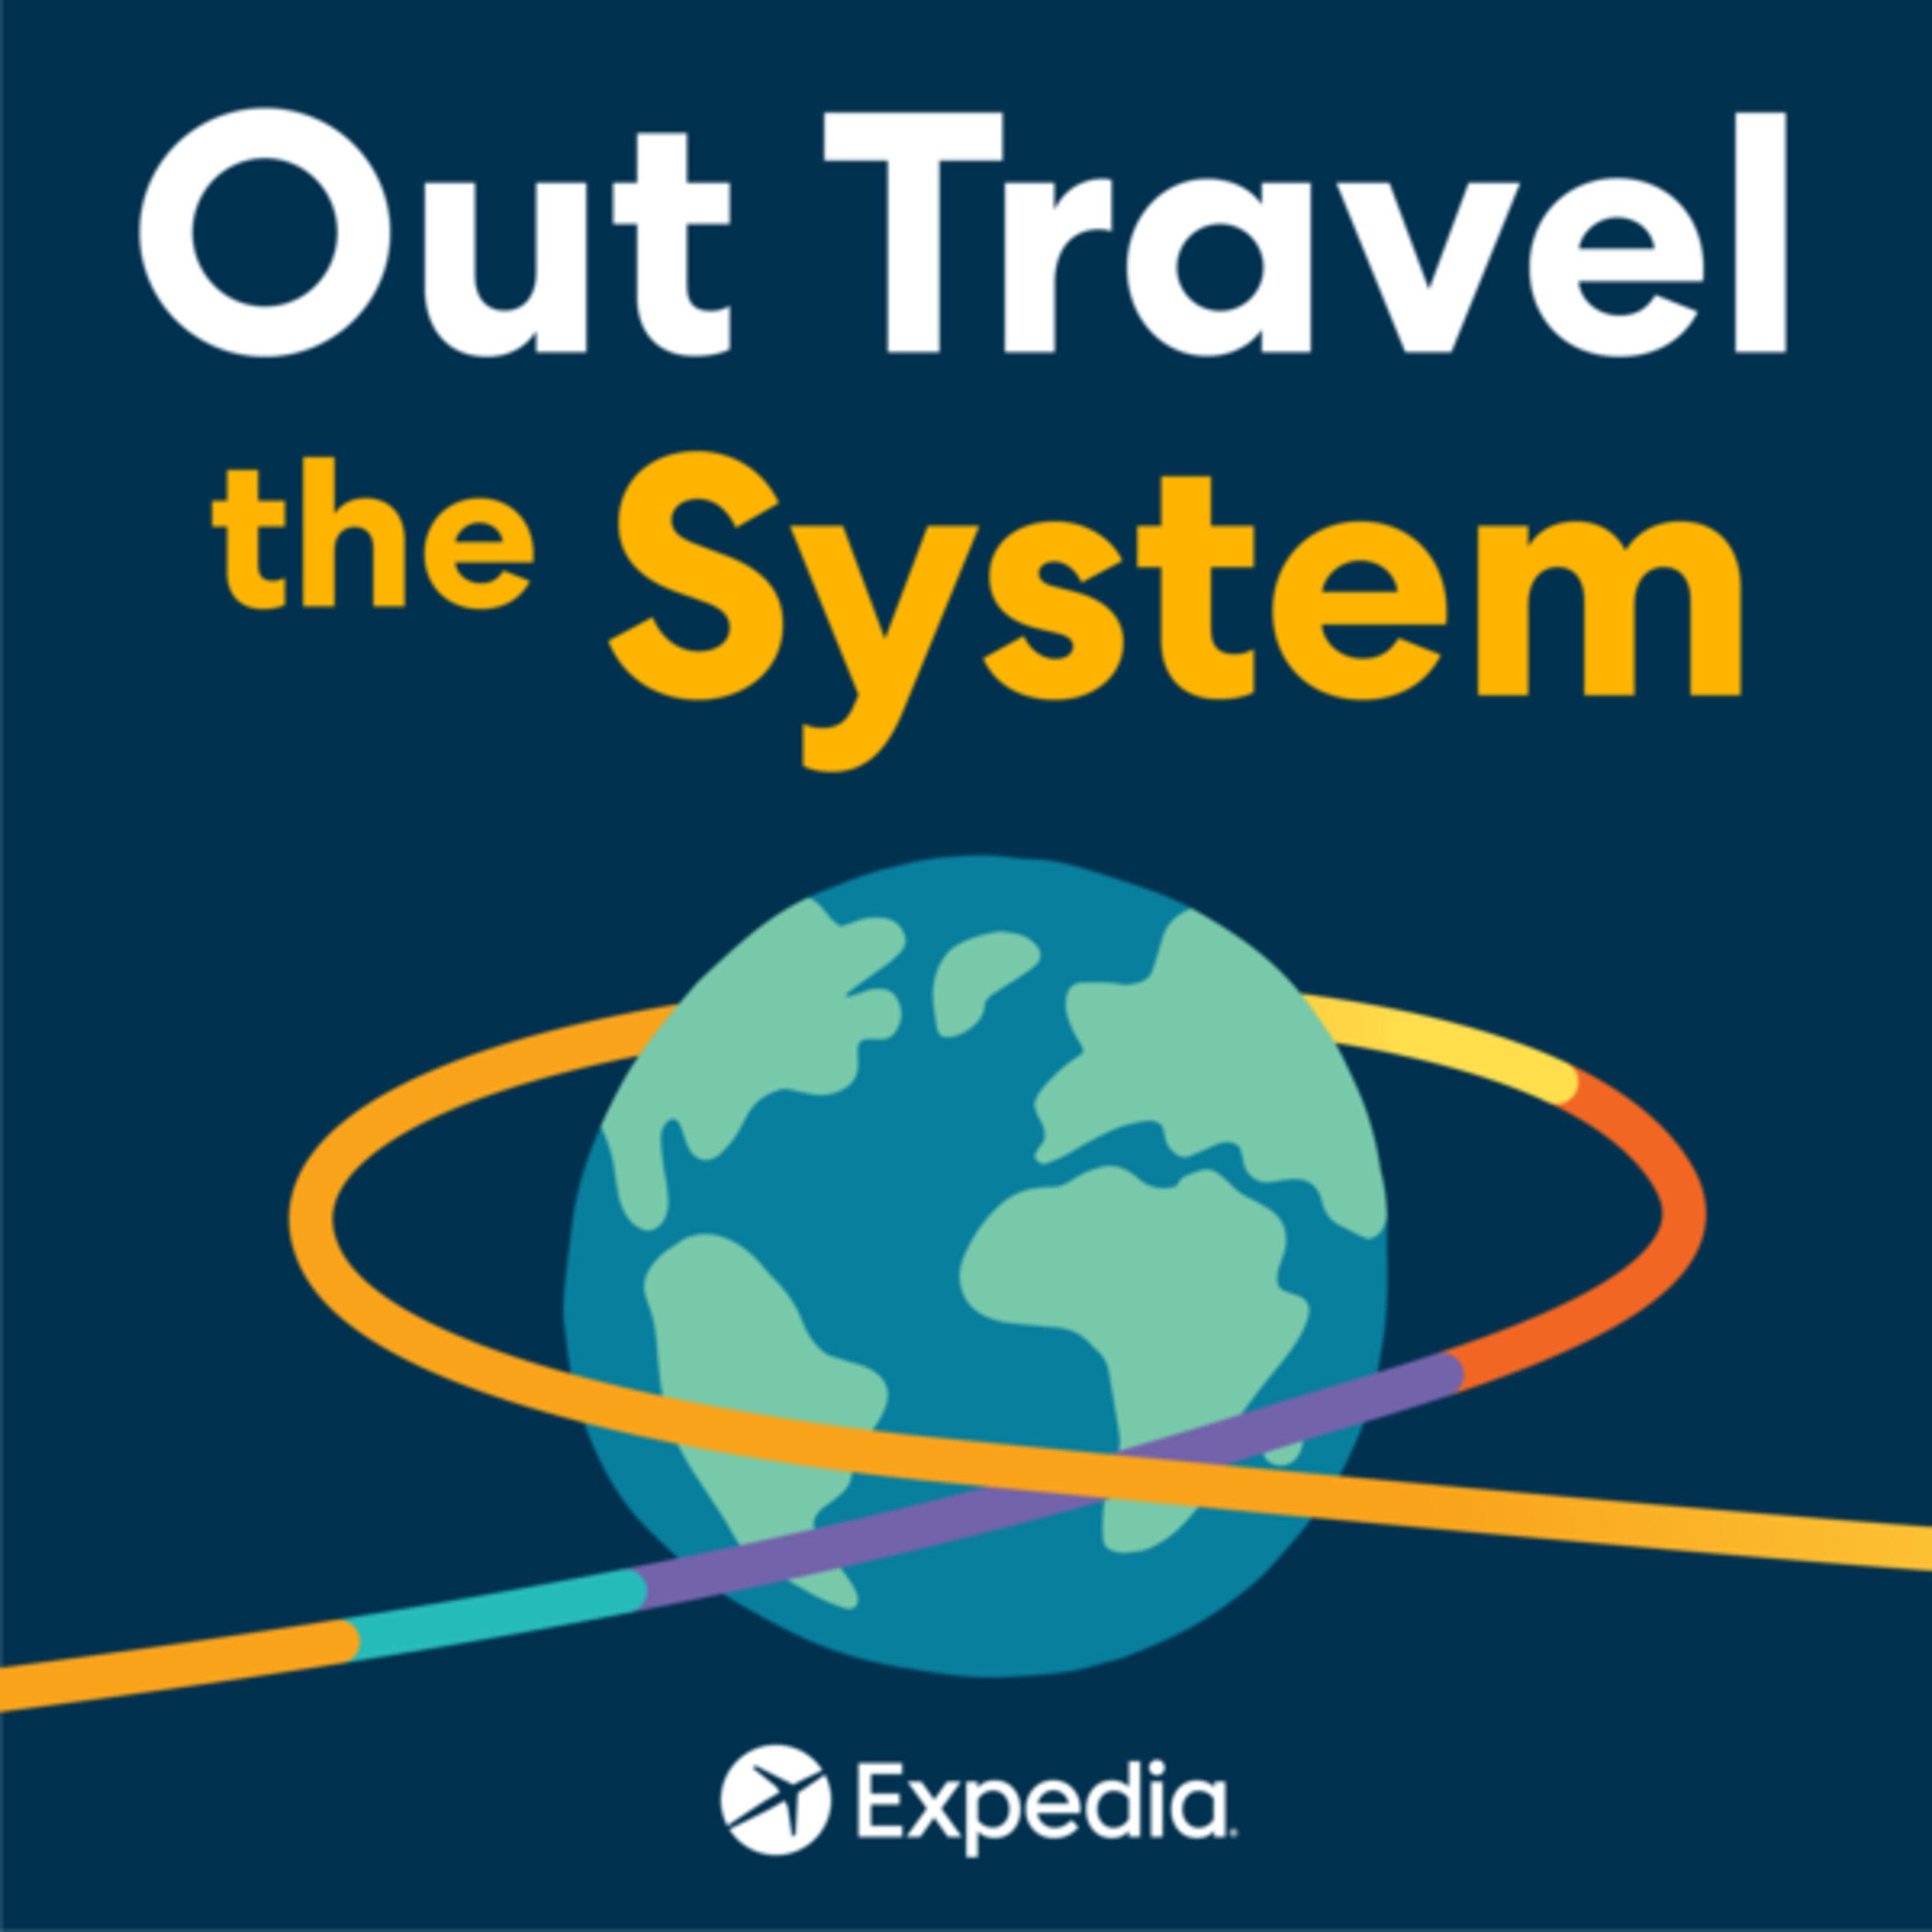 Thumbnail for "Introducing Out Travel The System".